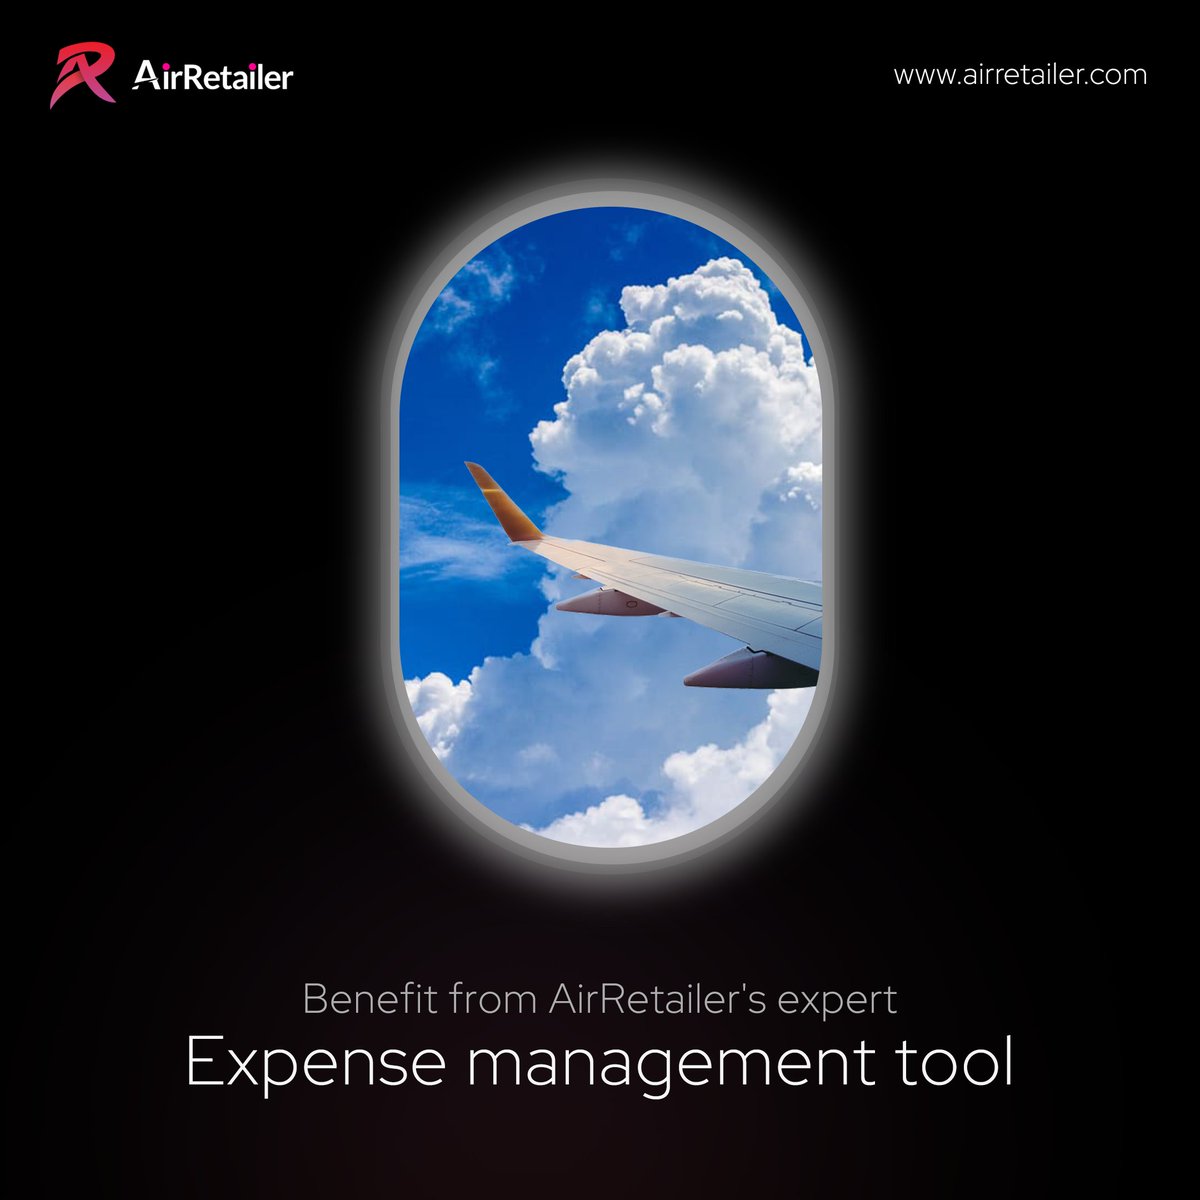 Unlock the power of seamless travel and expense management today.
#AirRetailer #corporatetravelmanagement #corporatetravel #businesstravel #travelsoftware #businesstrip #bisnesstravelandexpensesoftware #corporatetraveltool #flightcorporatebooking #effortlessbusinesstravel